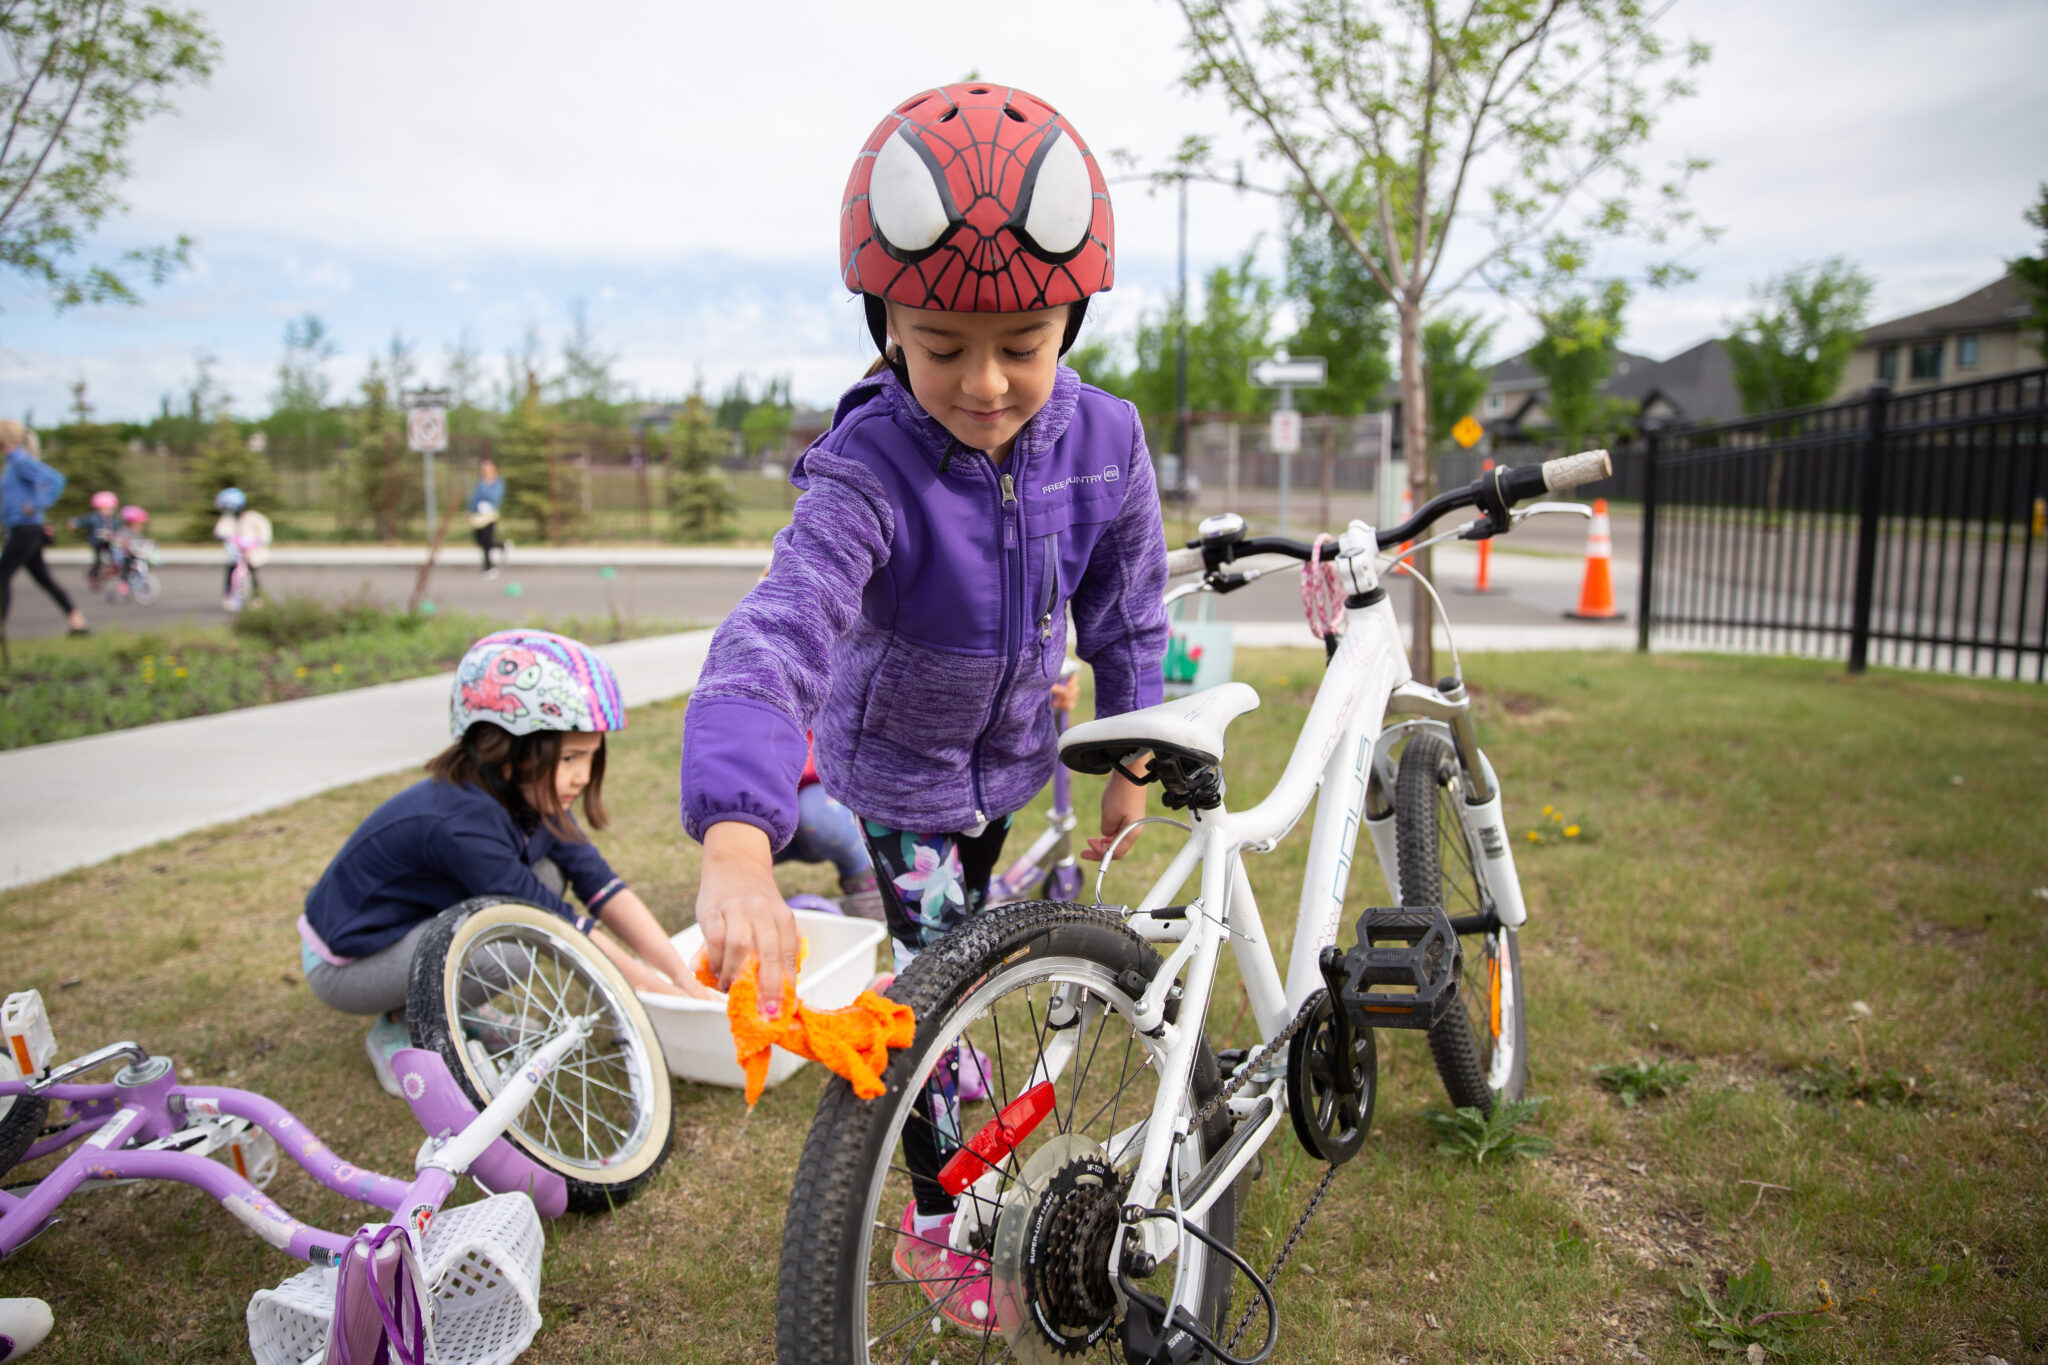 A young girl wearing a purple sweater and a Spiderman cycling helmet washes her white bike.